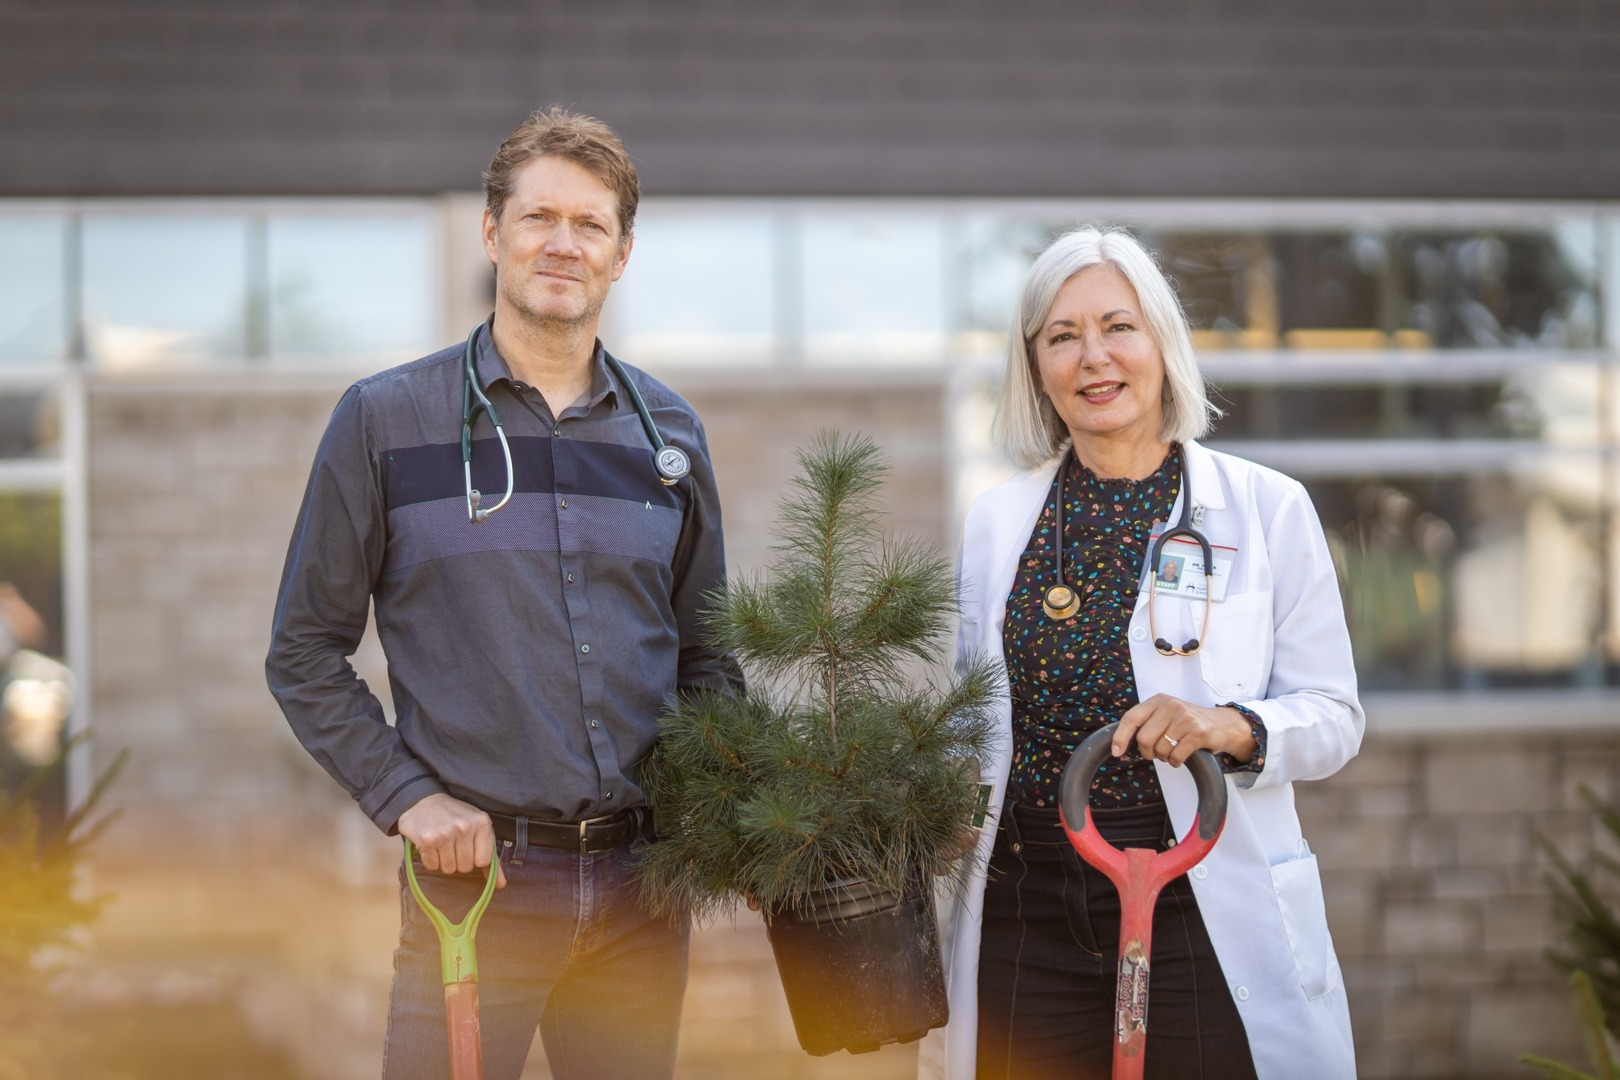 Dr. Myles Sergeant and Dr. Nora Cullen, outside Hamilton General Hospital holding a small tree and shovels